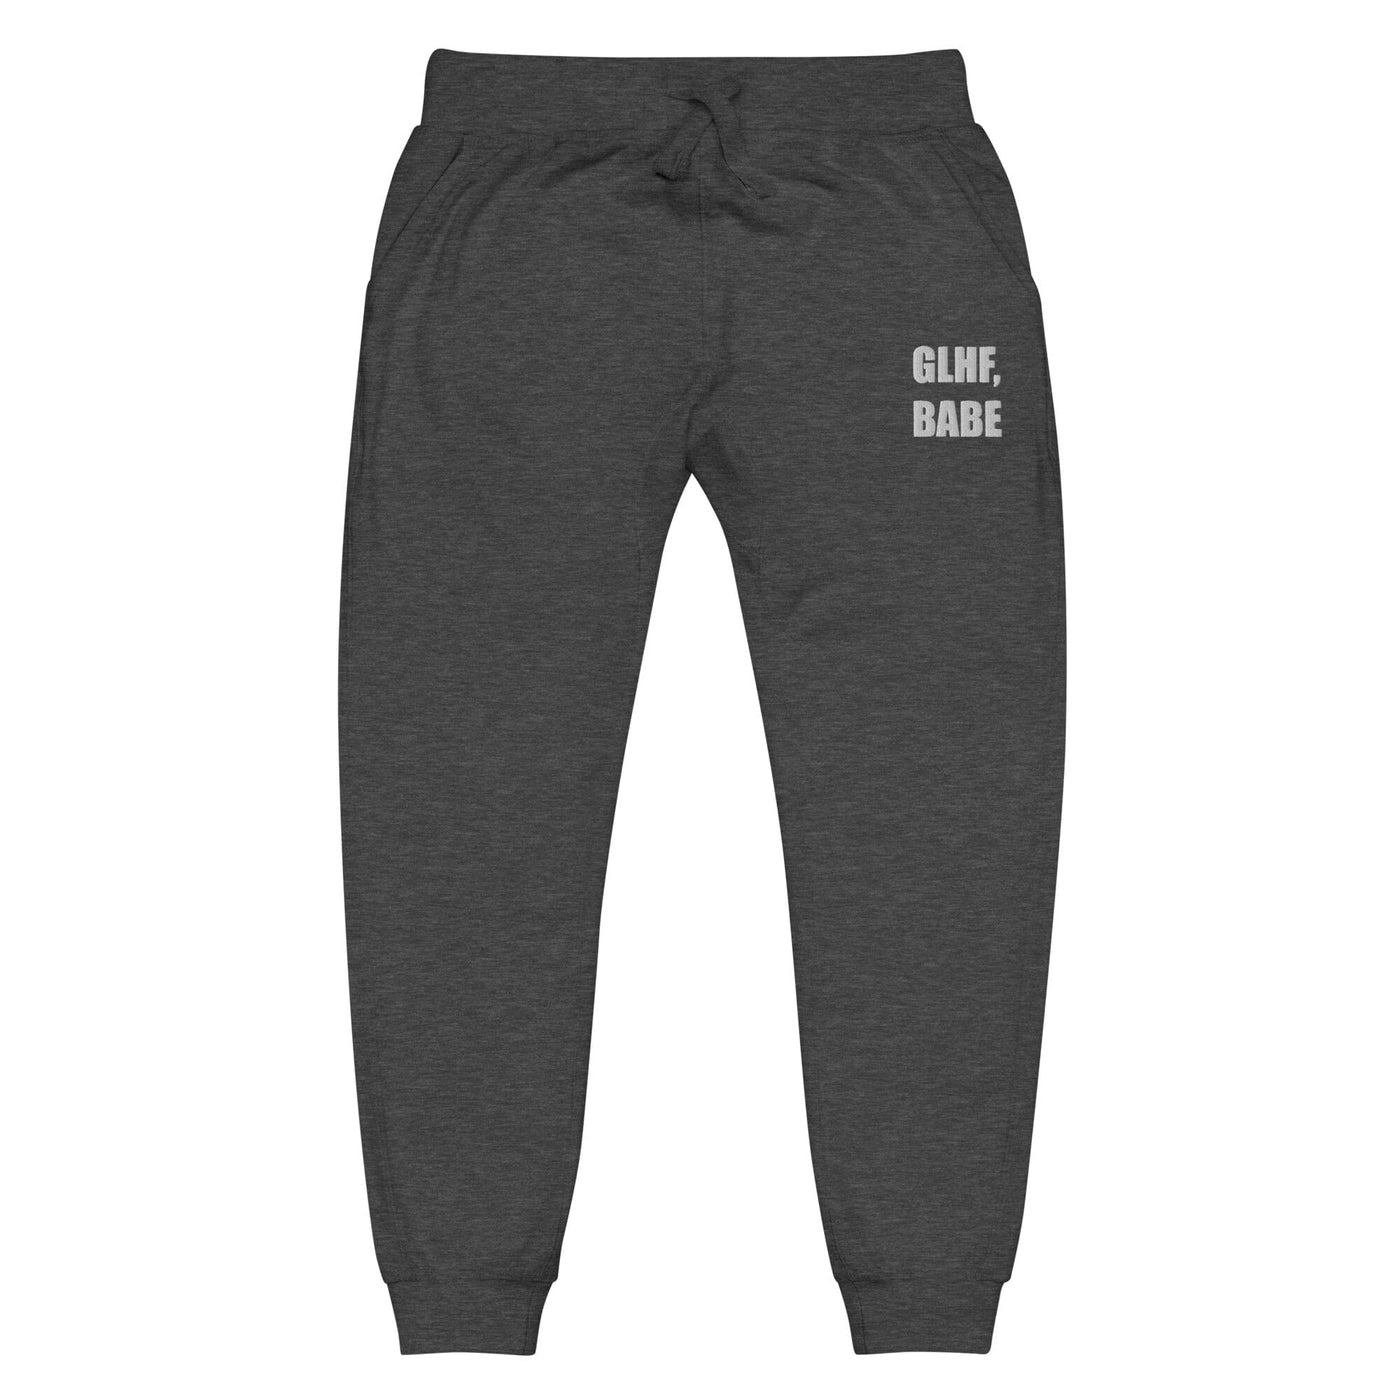 GLHF, Babe | Unisex fleece sweatpants | Gamer Affirmations Threads & Thistles Inventory Charcoal Heather XS 